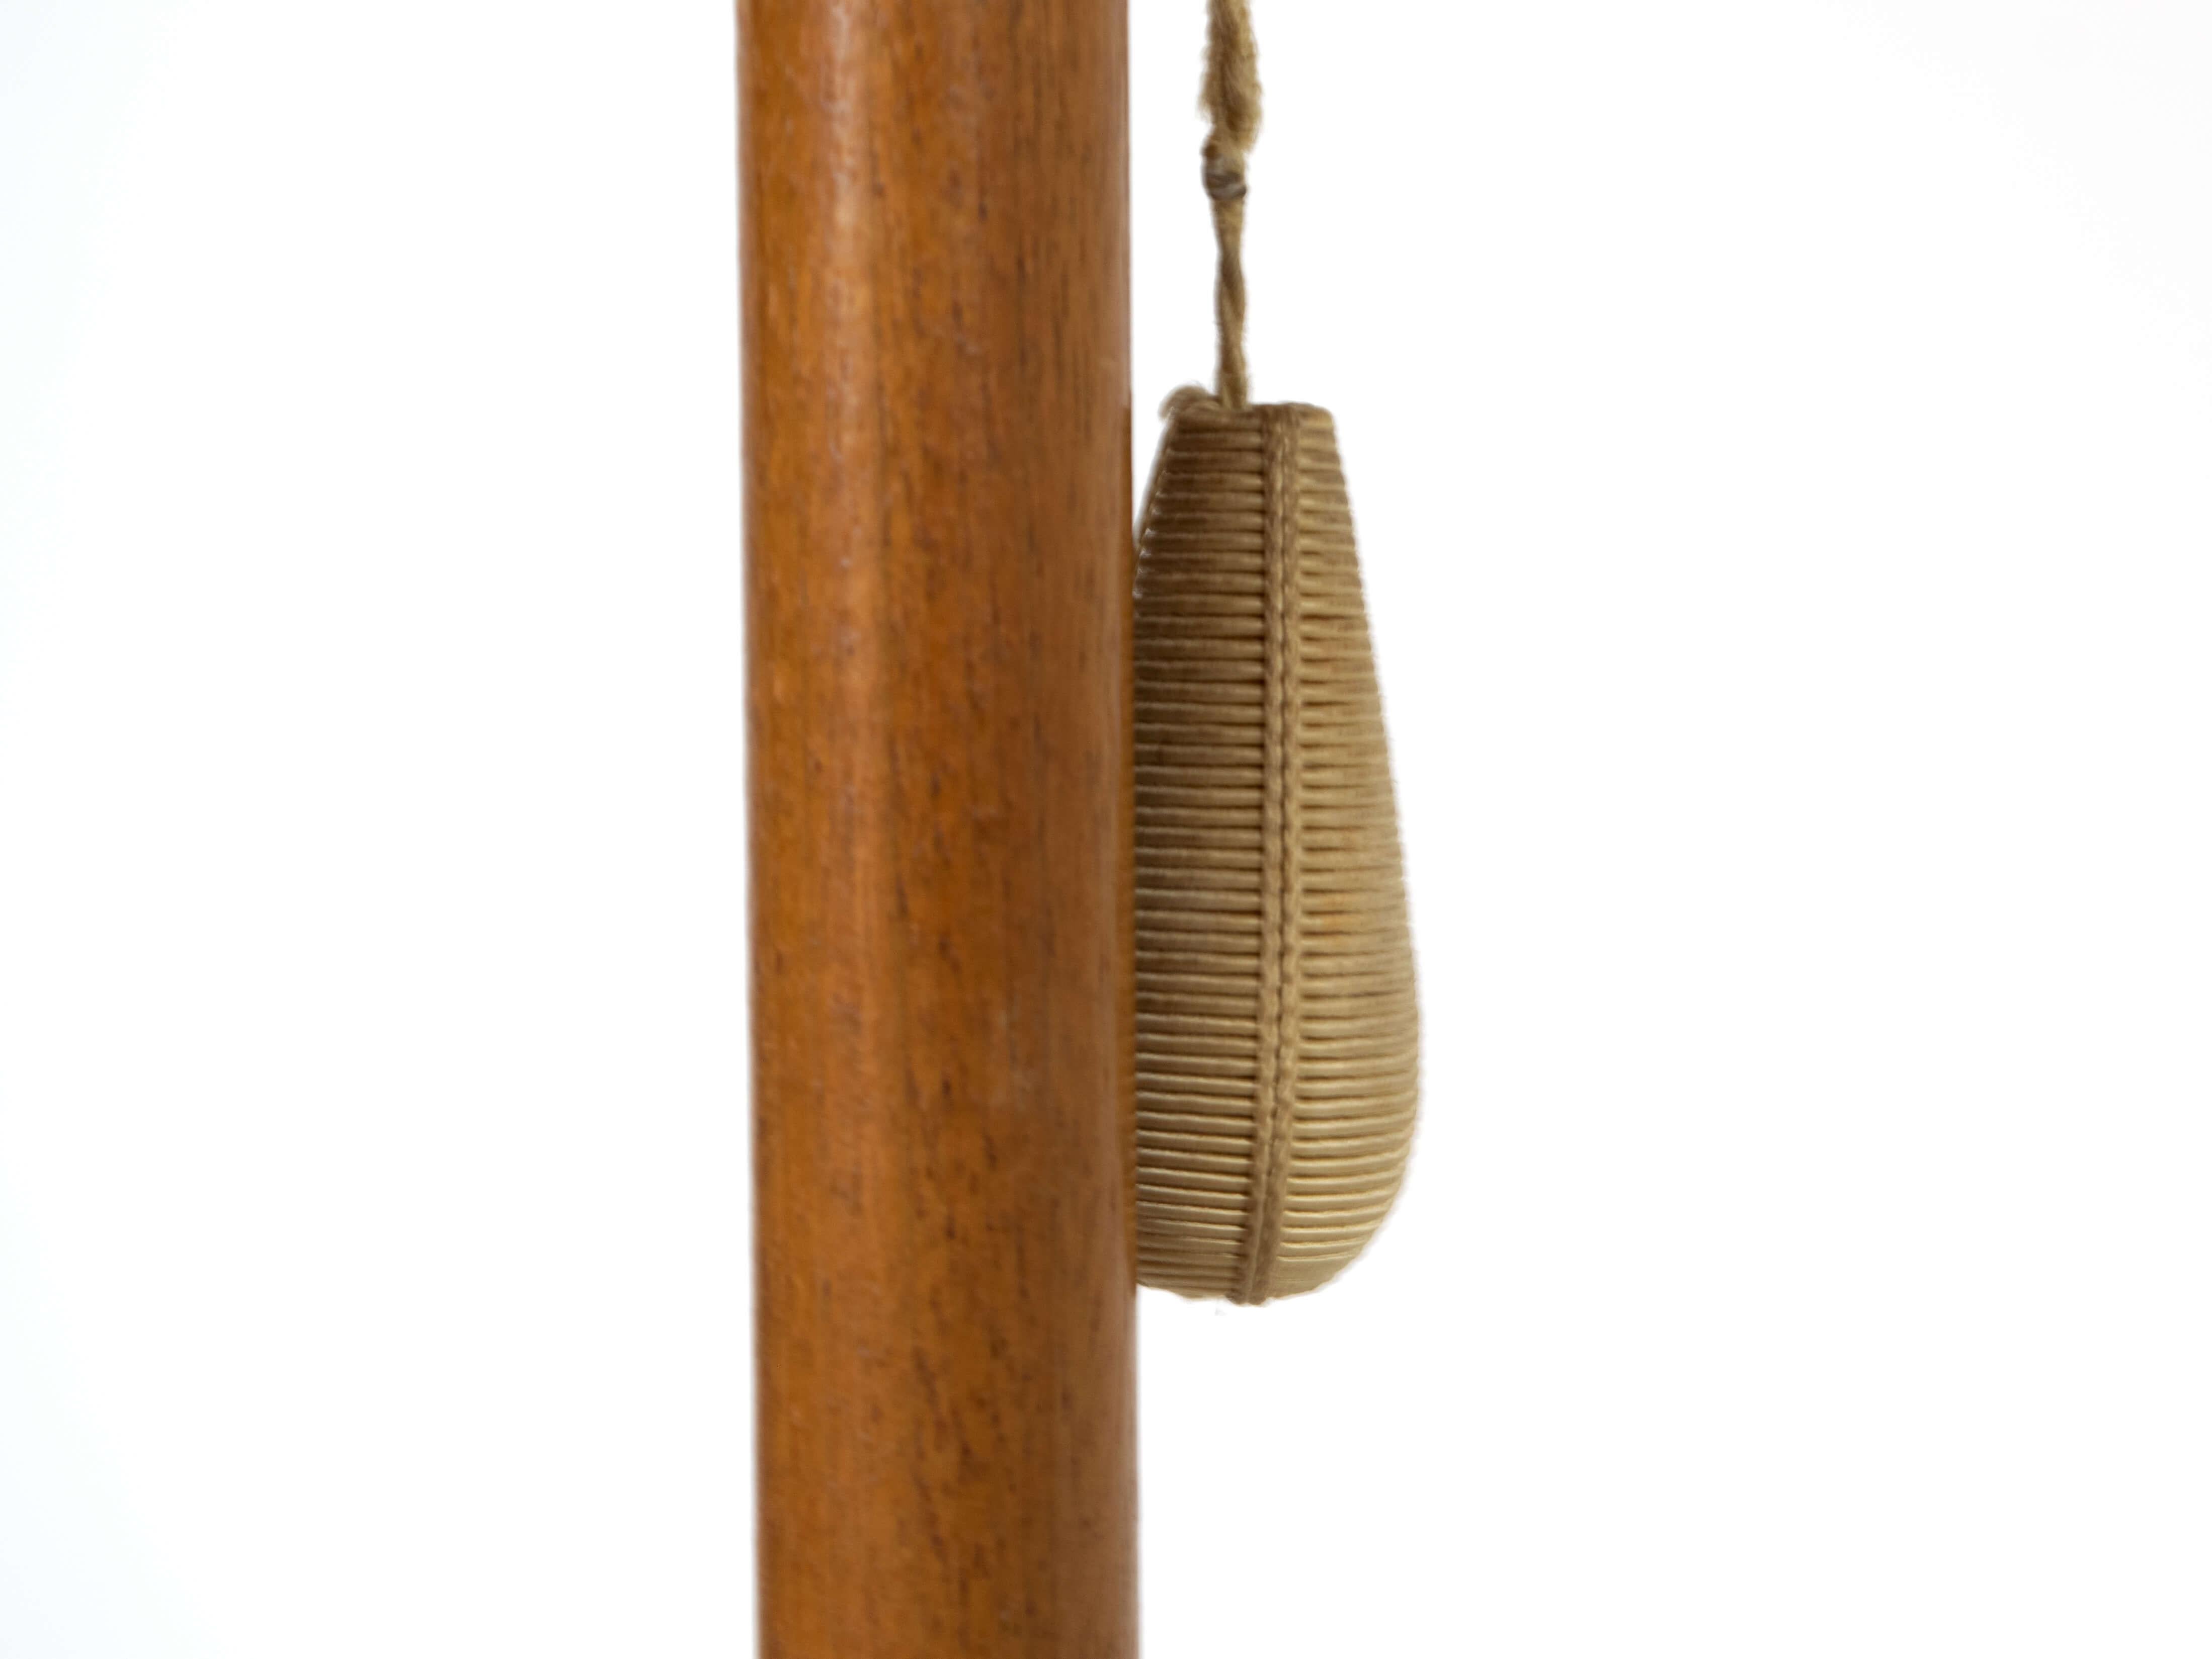 Temde Floor Lamp in Teak and Fabric, Germany, 1970s For Sale 2